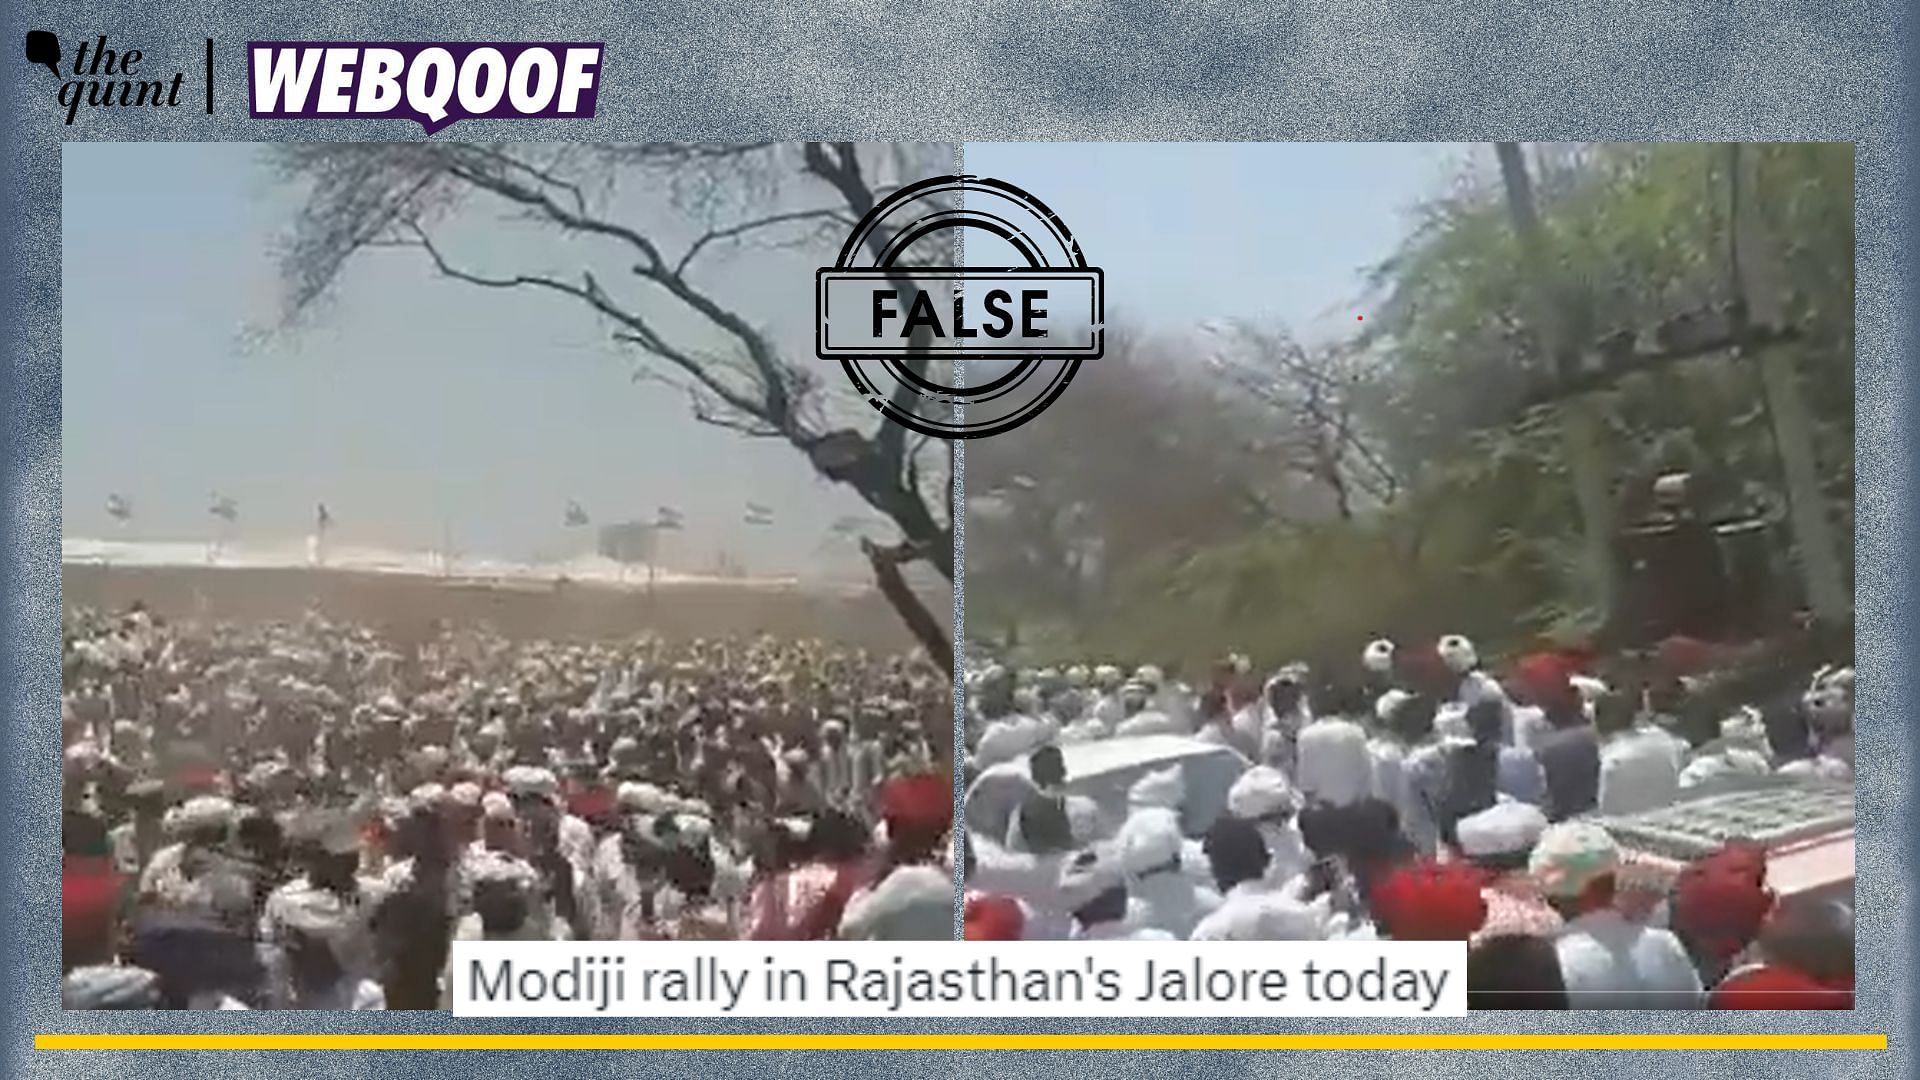 Old Video of Massive Crowd Shared as Visuals of PM Modi’s Recent Rally in Jalore